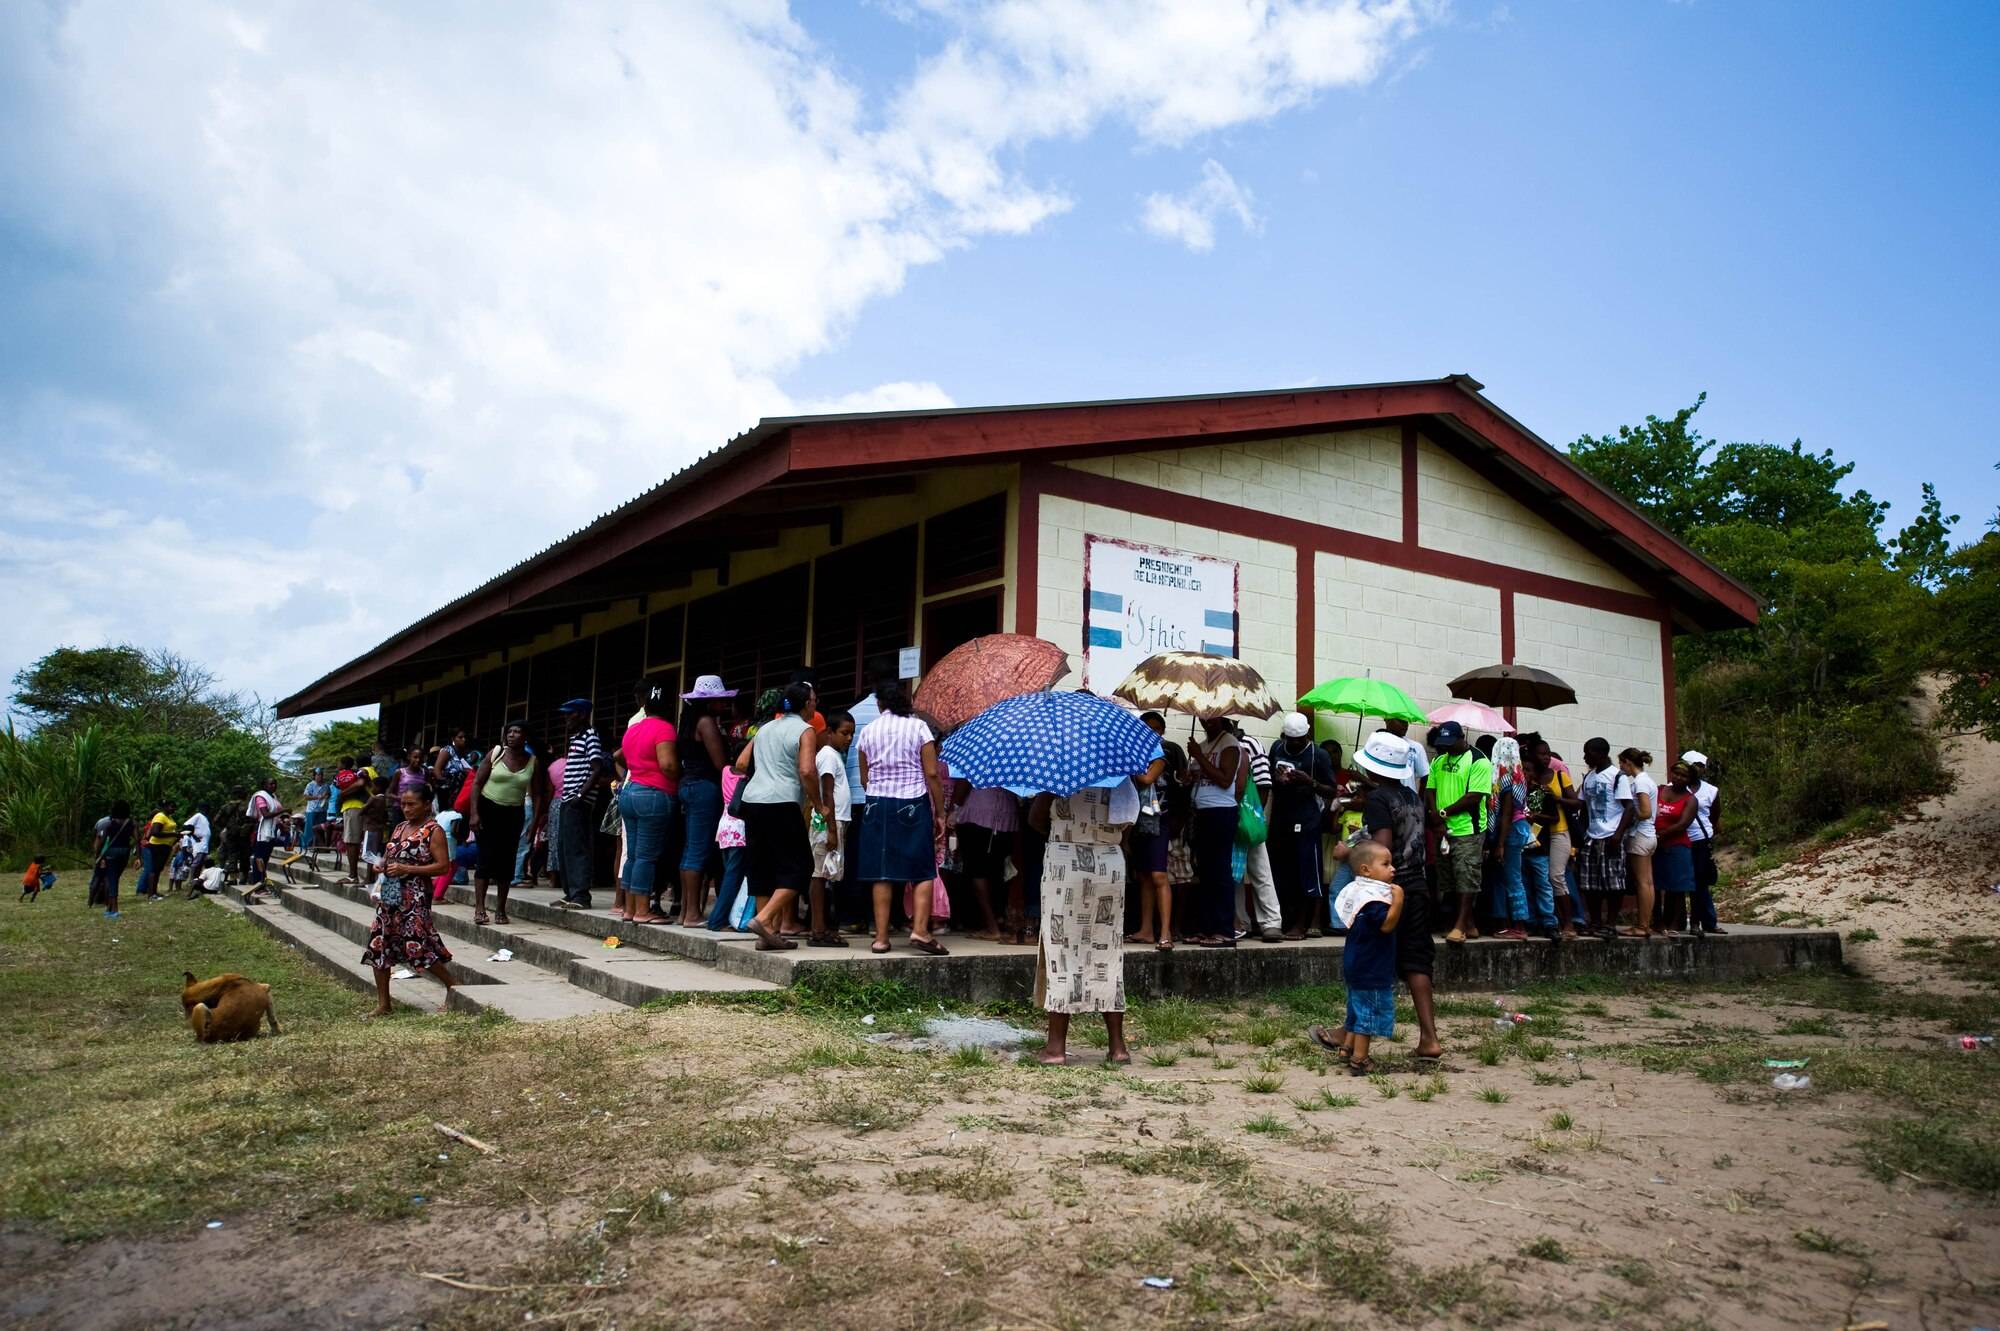 A Health Clinic in Honduras with a line out the door